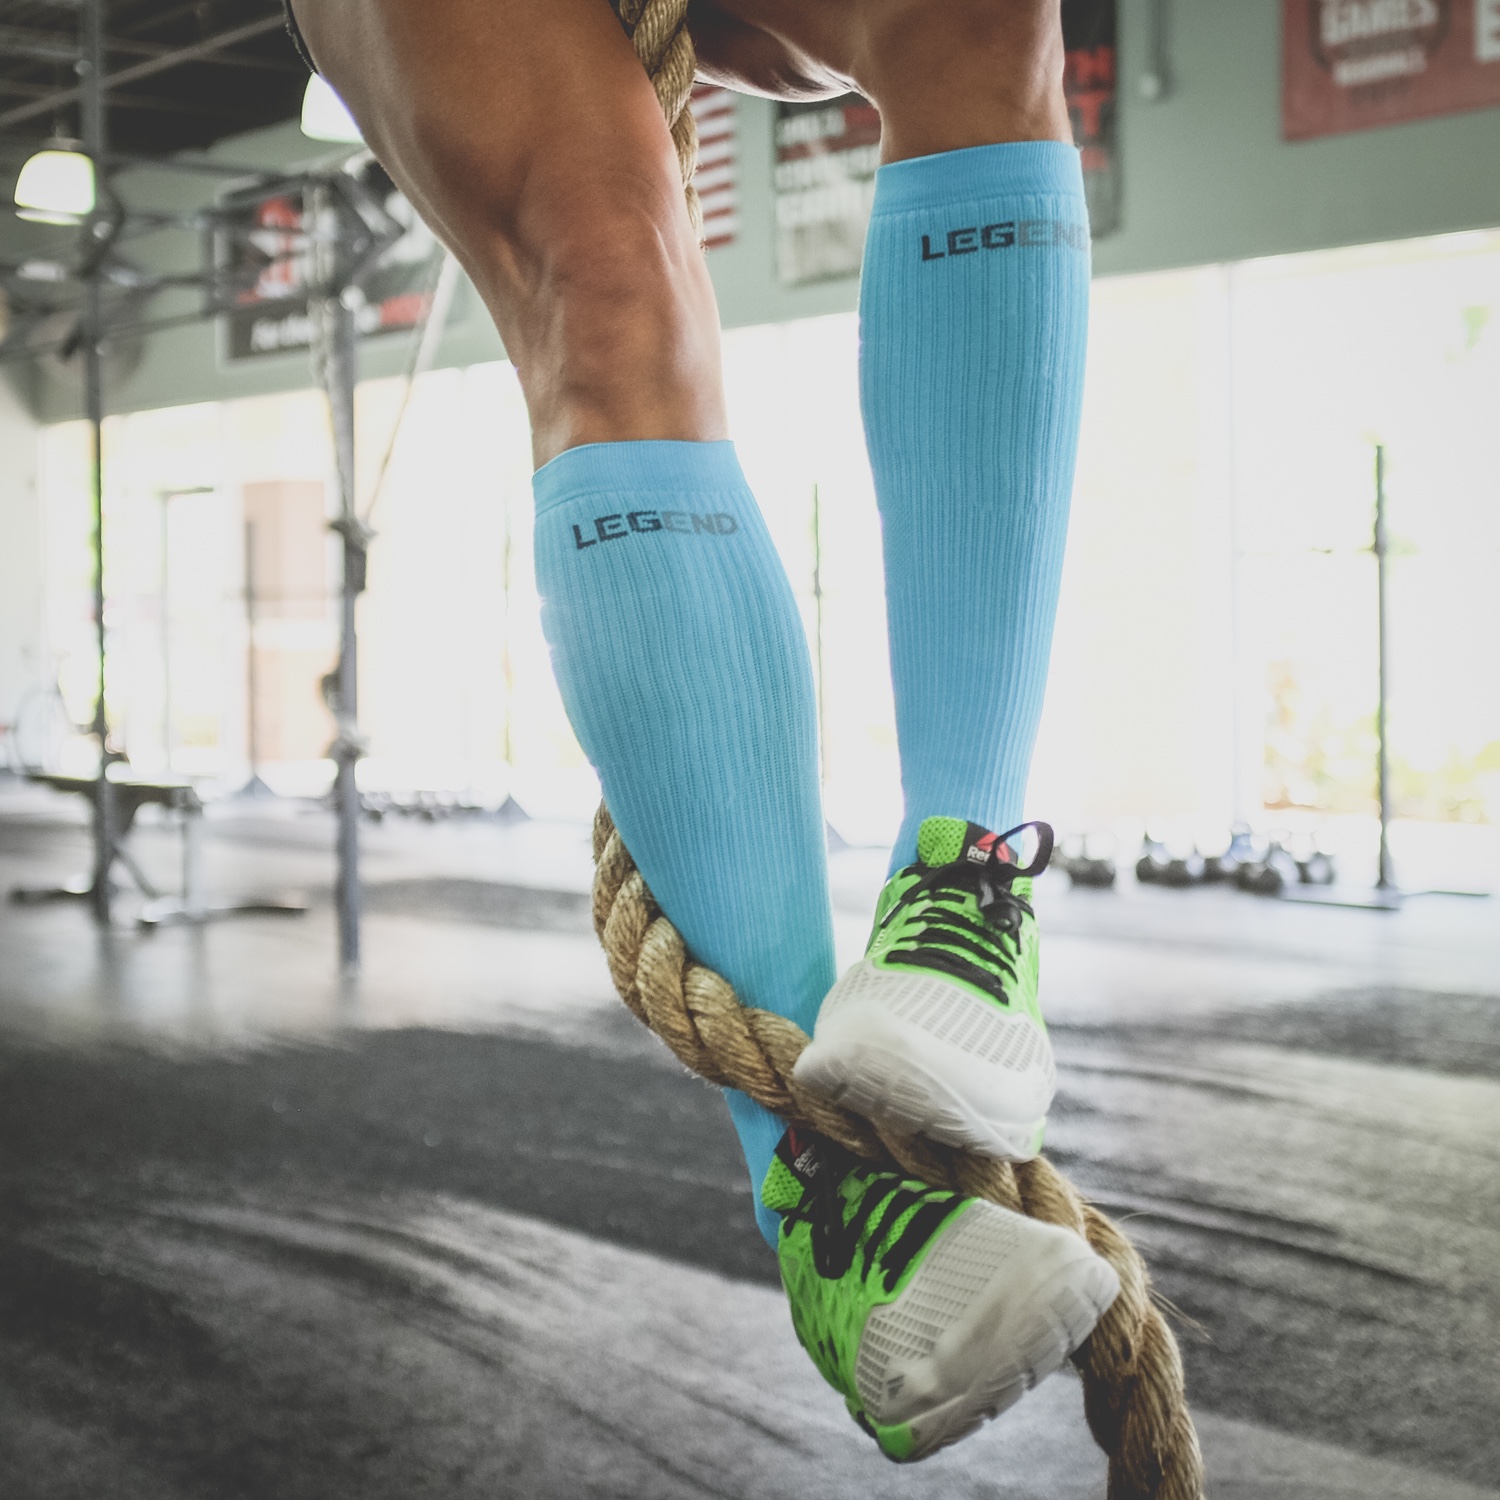 Why Use Compression Running Socks?